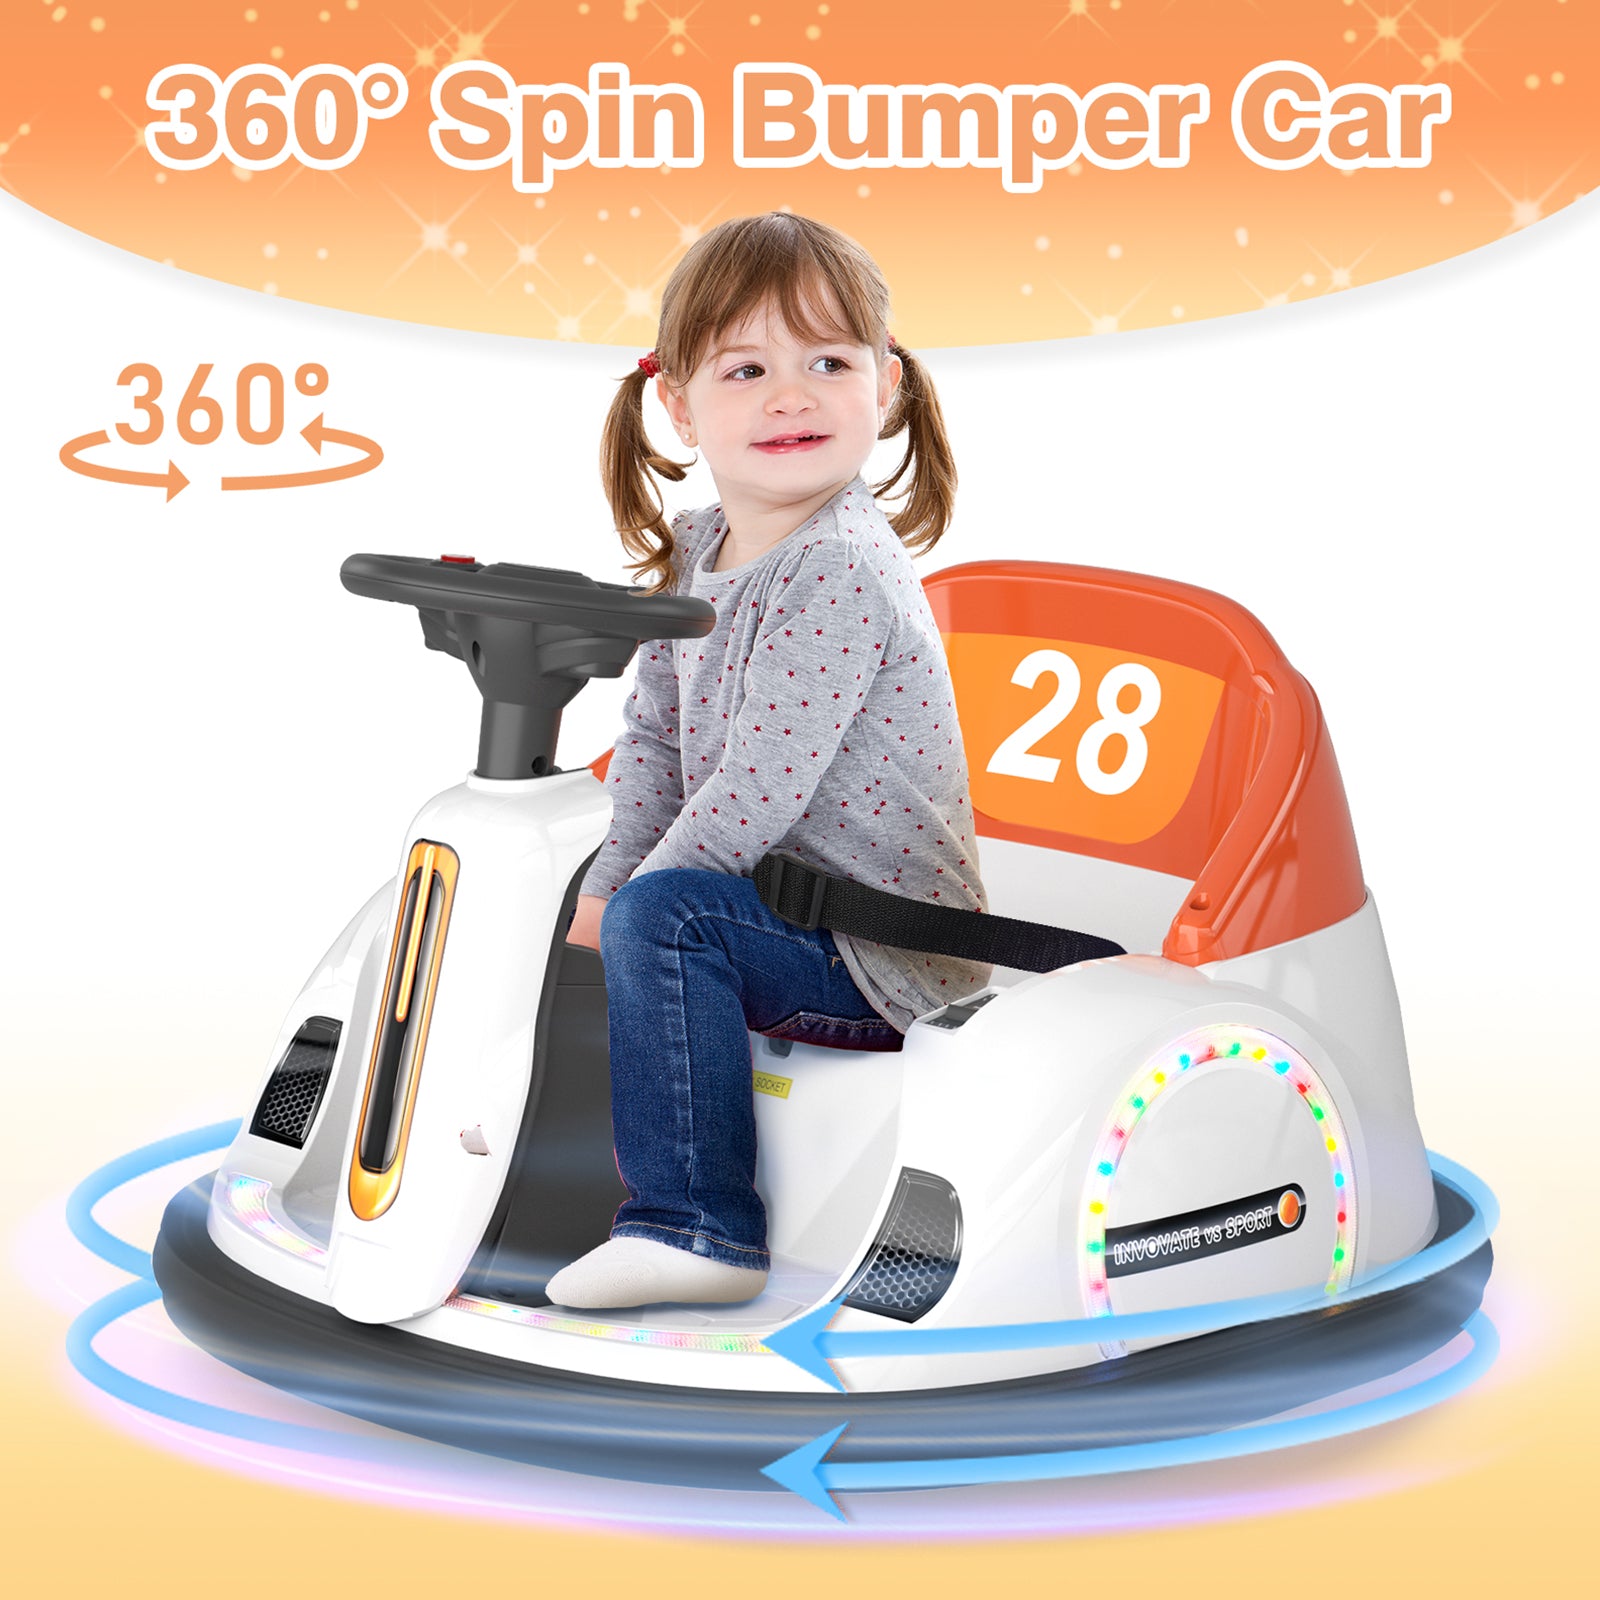 6V Electric Ride on Bumper Car Toys for Kids Toddlers 2-4 Years Old, 360° Spinning Bumping Toy Gifts Cars, Music Play, Lights, 0-2 mph, Orange